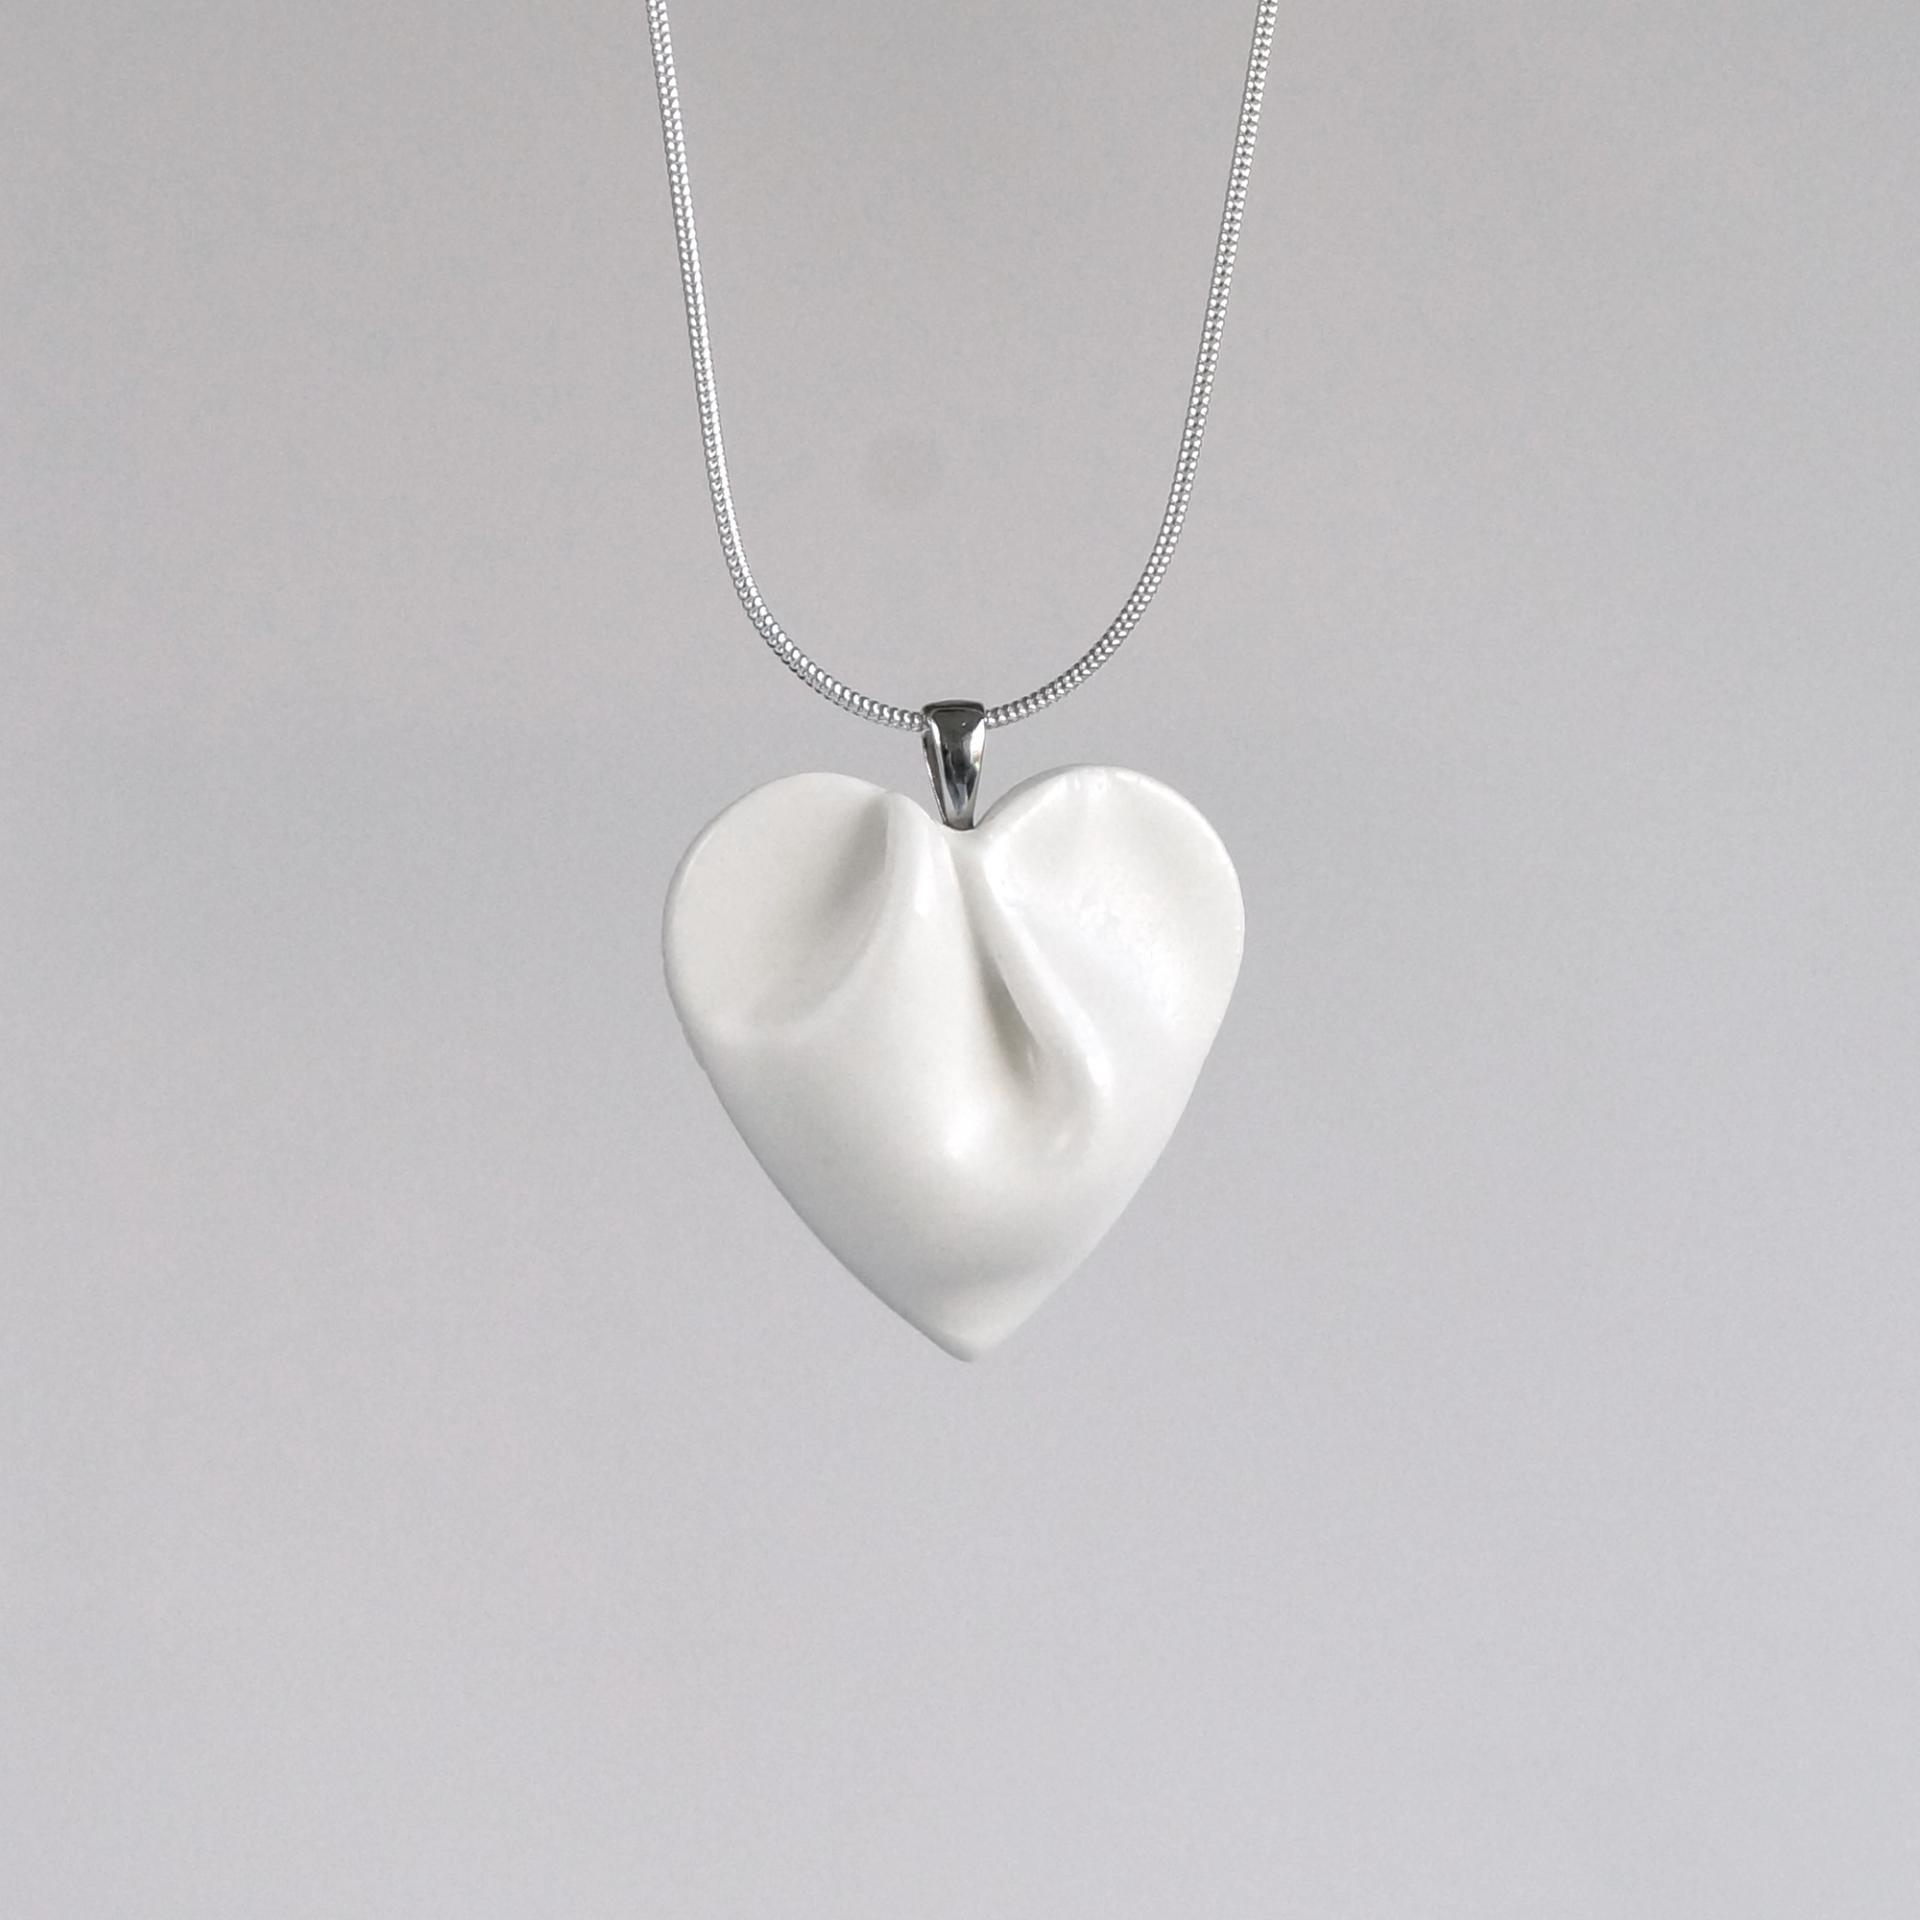 Bride necklace, draped heart, porcelain heart, heart necklace, 925 sterling silver, snake chain, Vanillakiln, 18th wedding an